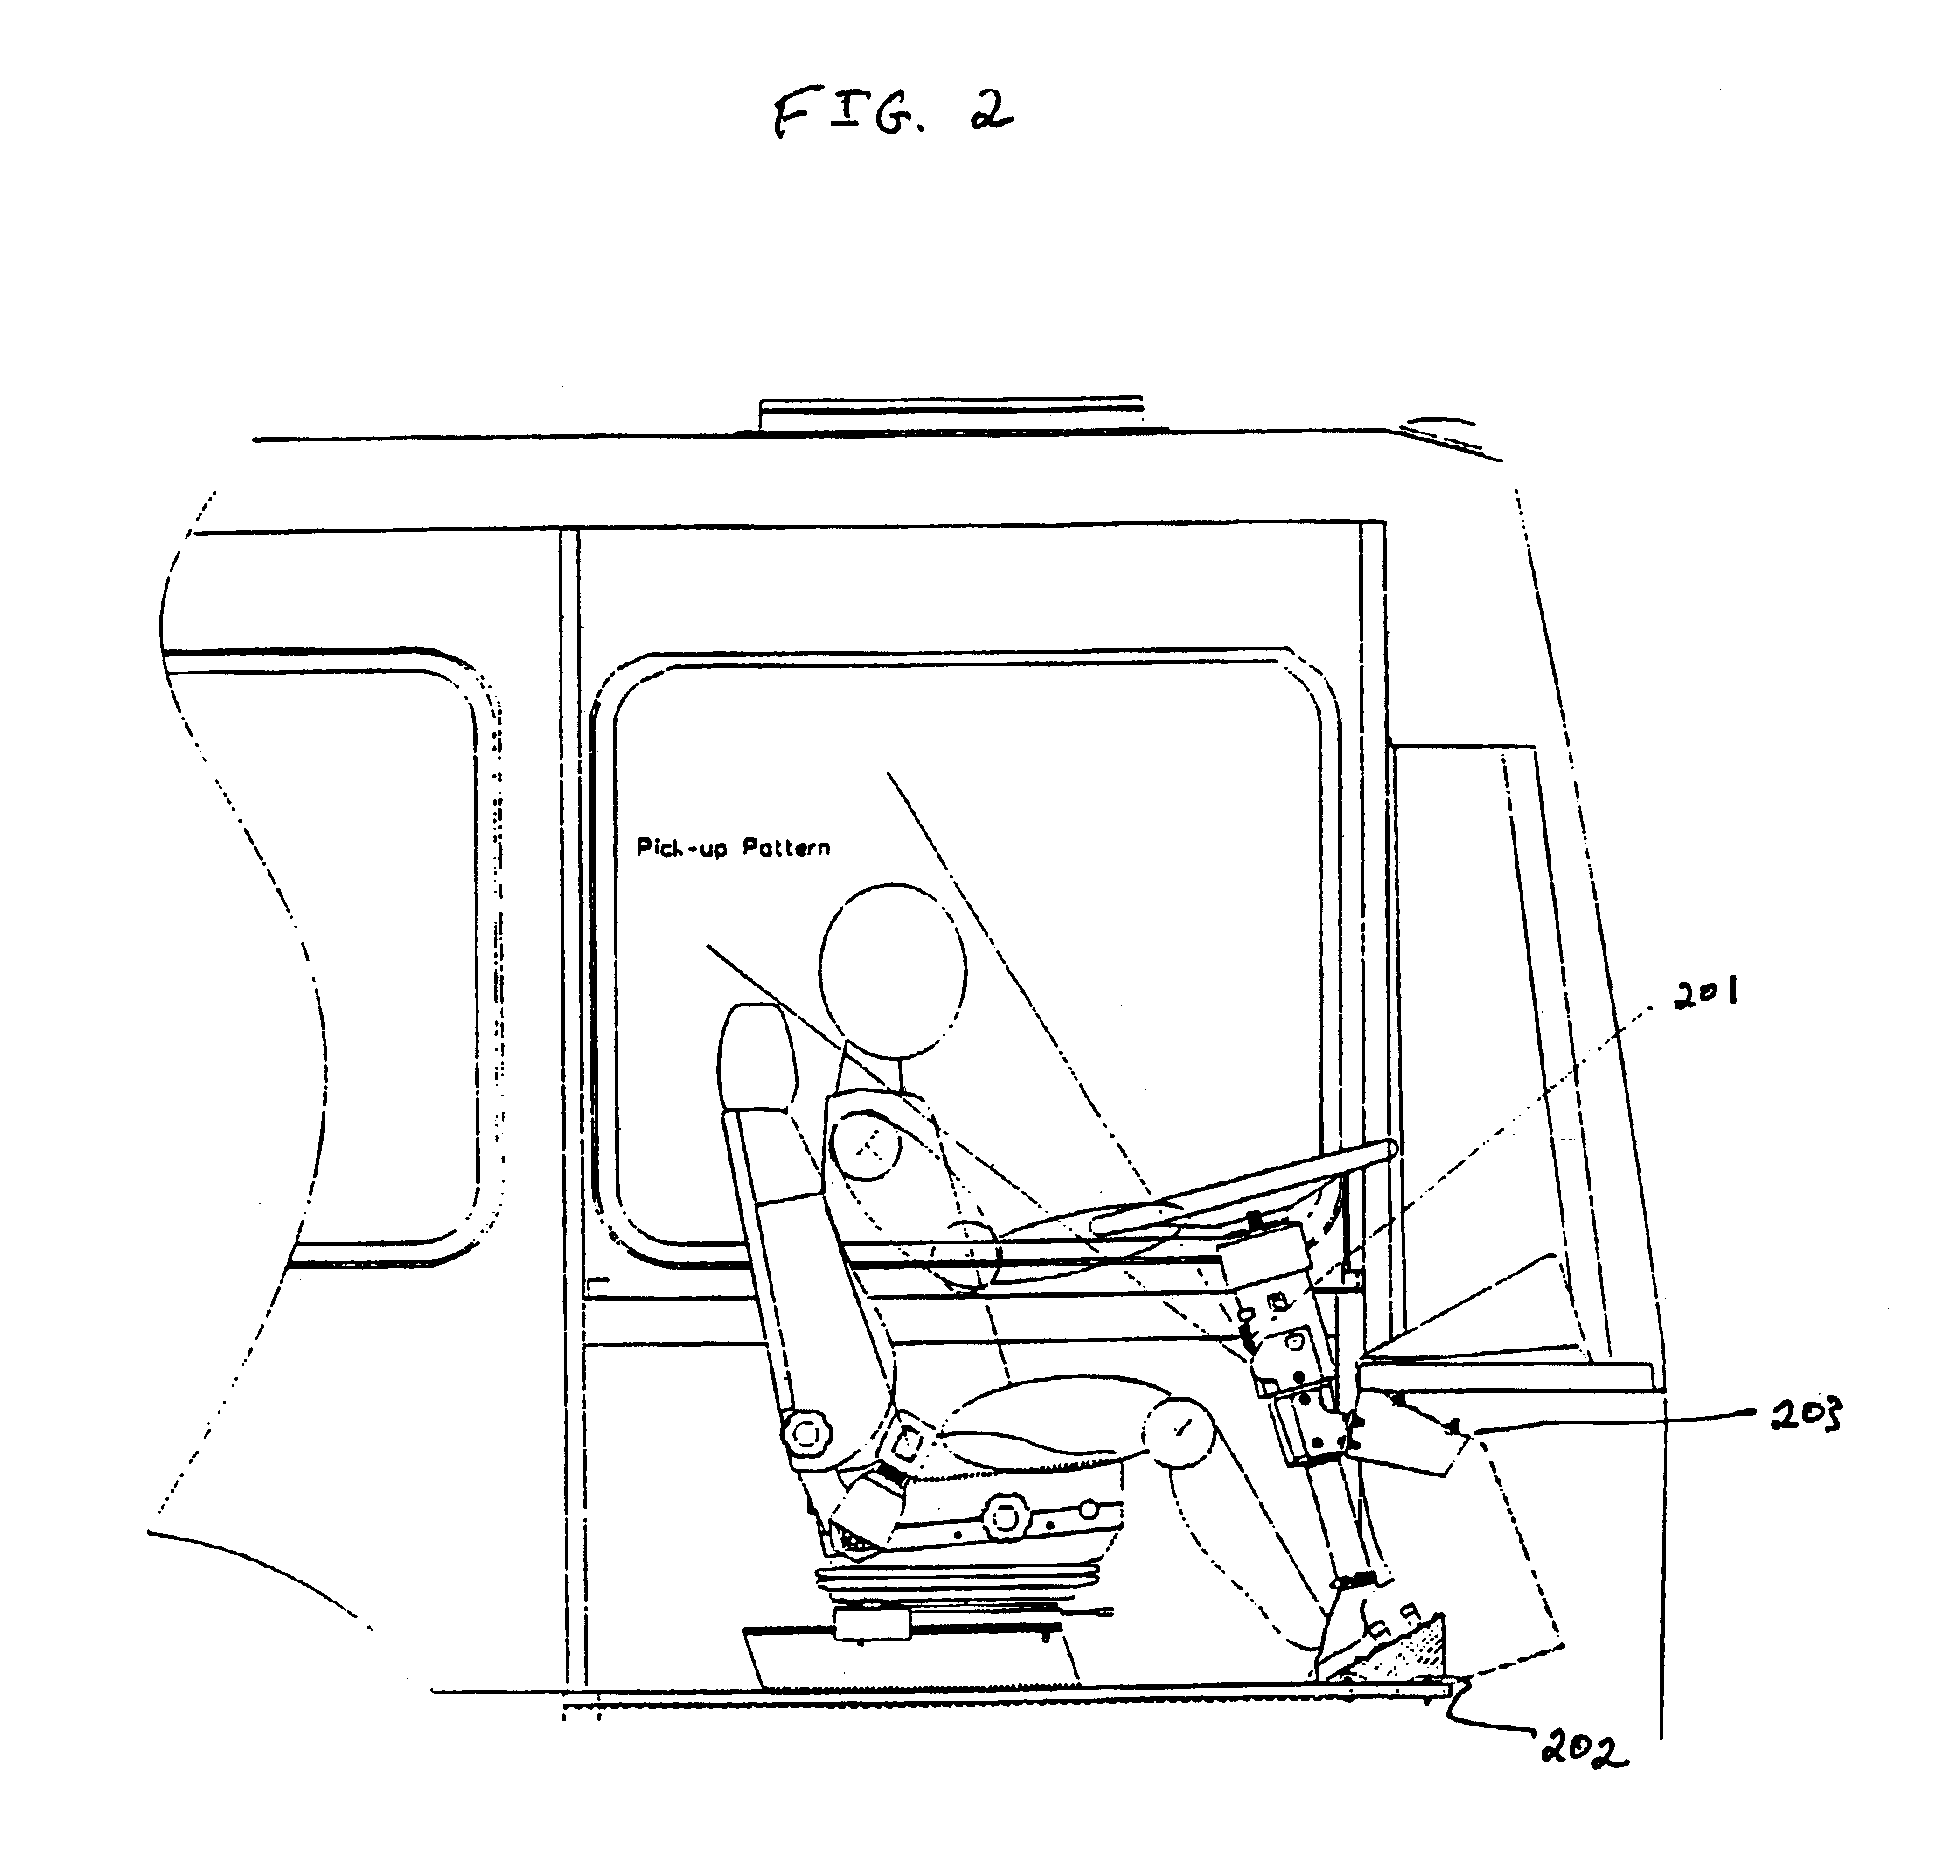 Public address system and method for an urban transit vehicle